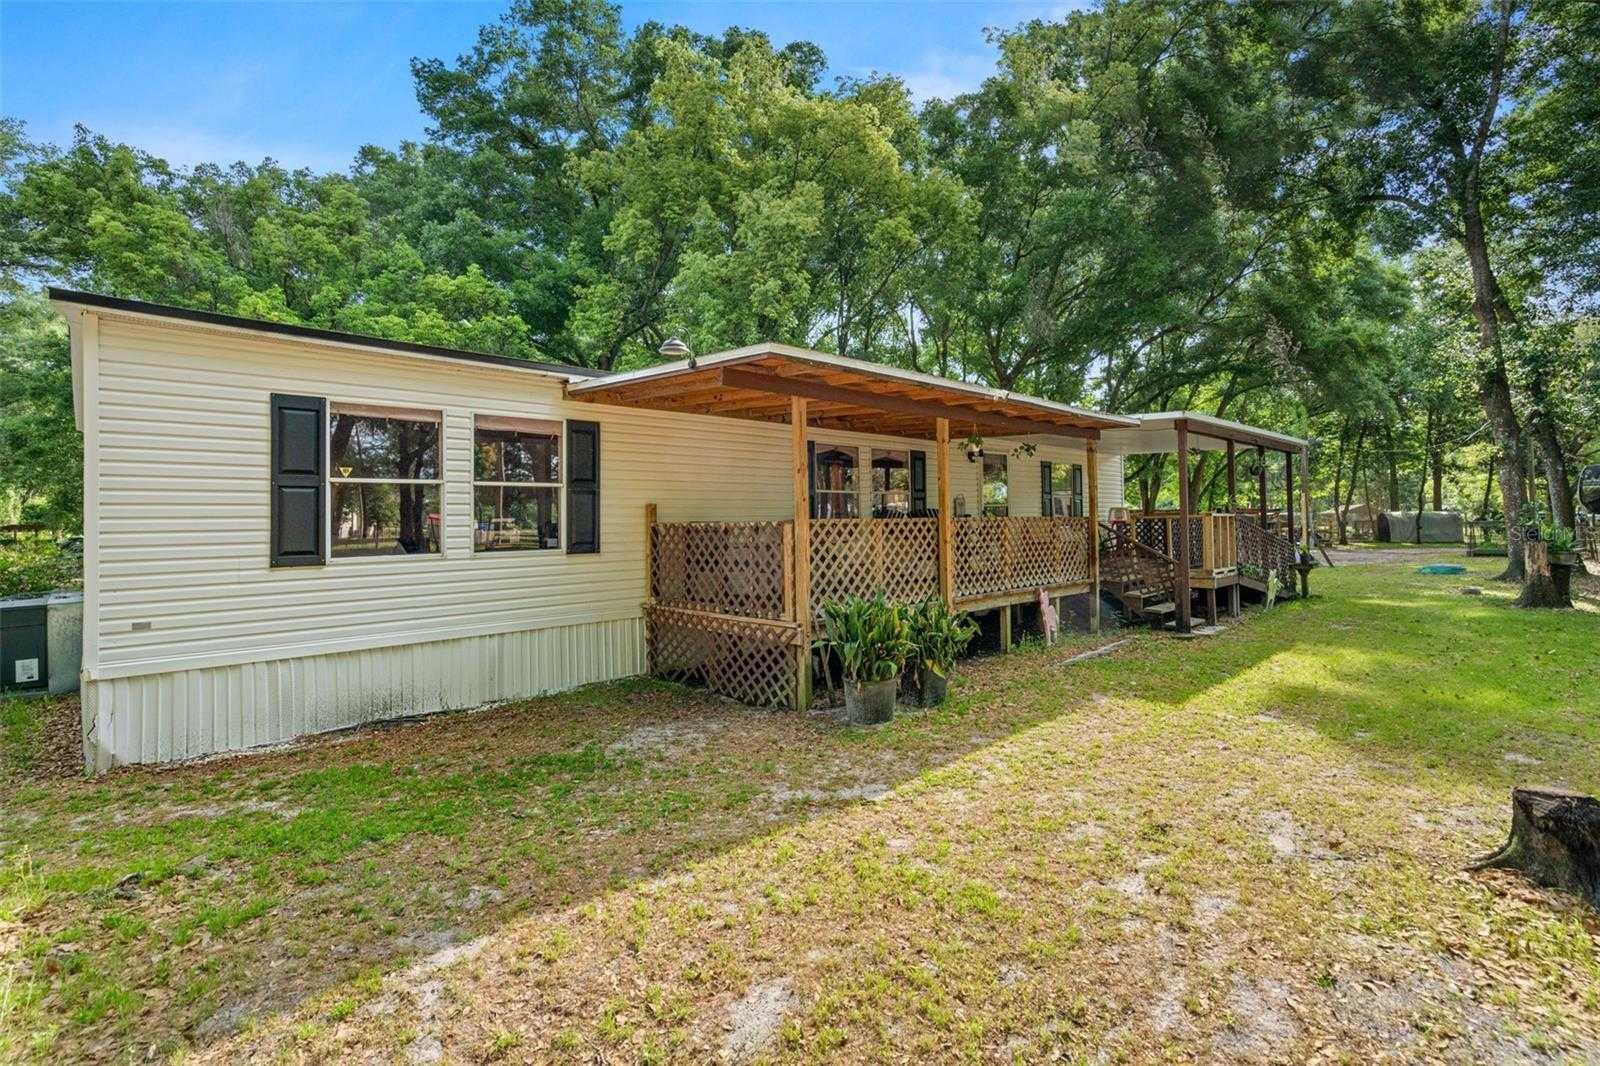 41033 LYNBROOK DR, ZEPHYRHILLS, Manufactured Home - Post 1977,  for sale, Natalie Amento, PA, Florida Realty Investments